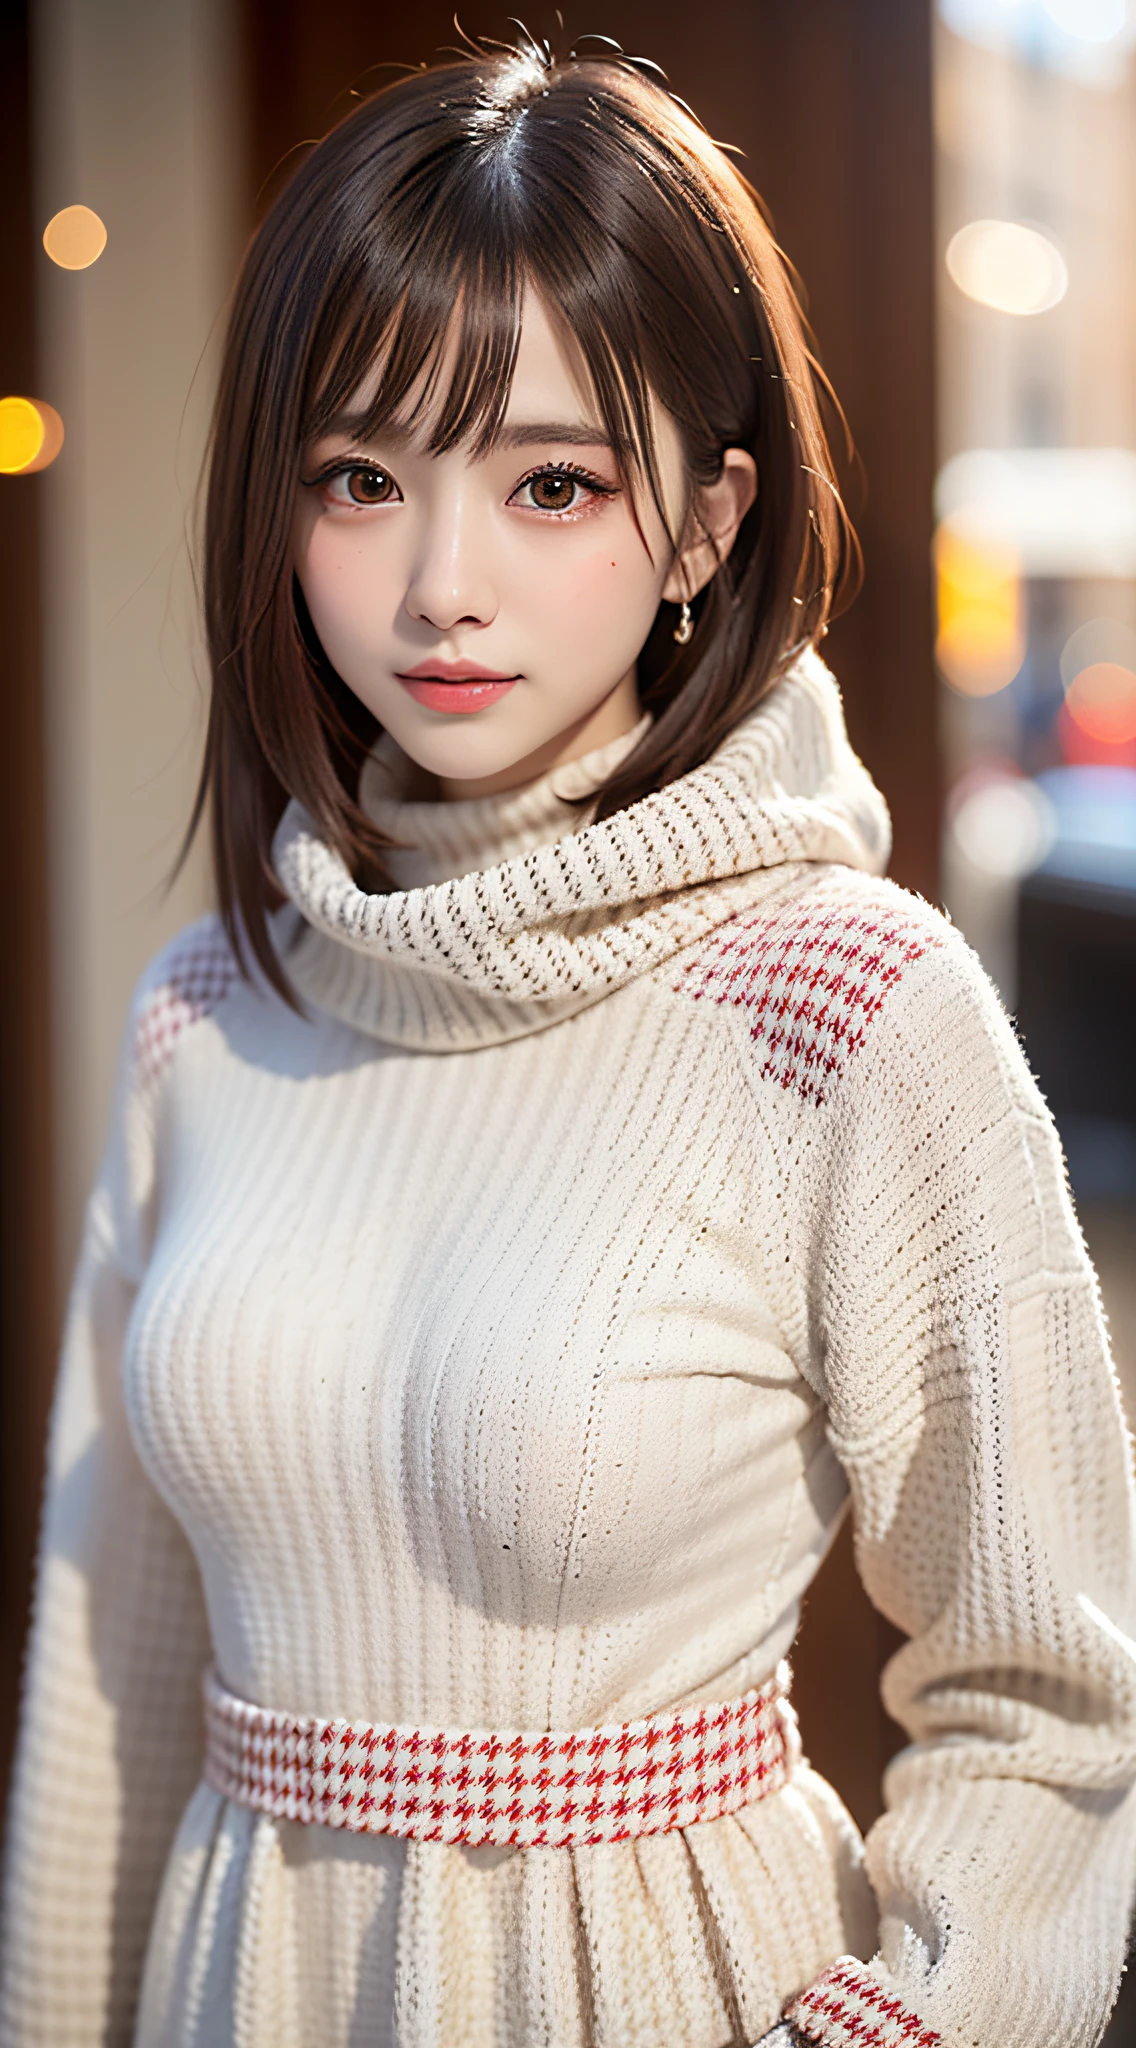 1 beautiful young girl, Super beautiful detailed face, smile shyly, symmetrical black eyes, small breasts), (red houndstooth coat:1.4), (off-white turtleneck sweater dress:1.3), hime cut hair, (Fine face:1.2), High quality, Realistic, extremely detailed CG unified 8k wallpaper, highly detailed, High-definition raw color photos, professional photography, Realistic portrait, Cinematic Light, Beautiful detailed, Super Detail, high details, (((Bokeh))), depth of fields, illumination, Super stylish lighting, Floating, (High saturation), (colorful splashs), colorful bubble, (Shining), focus onface,